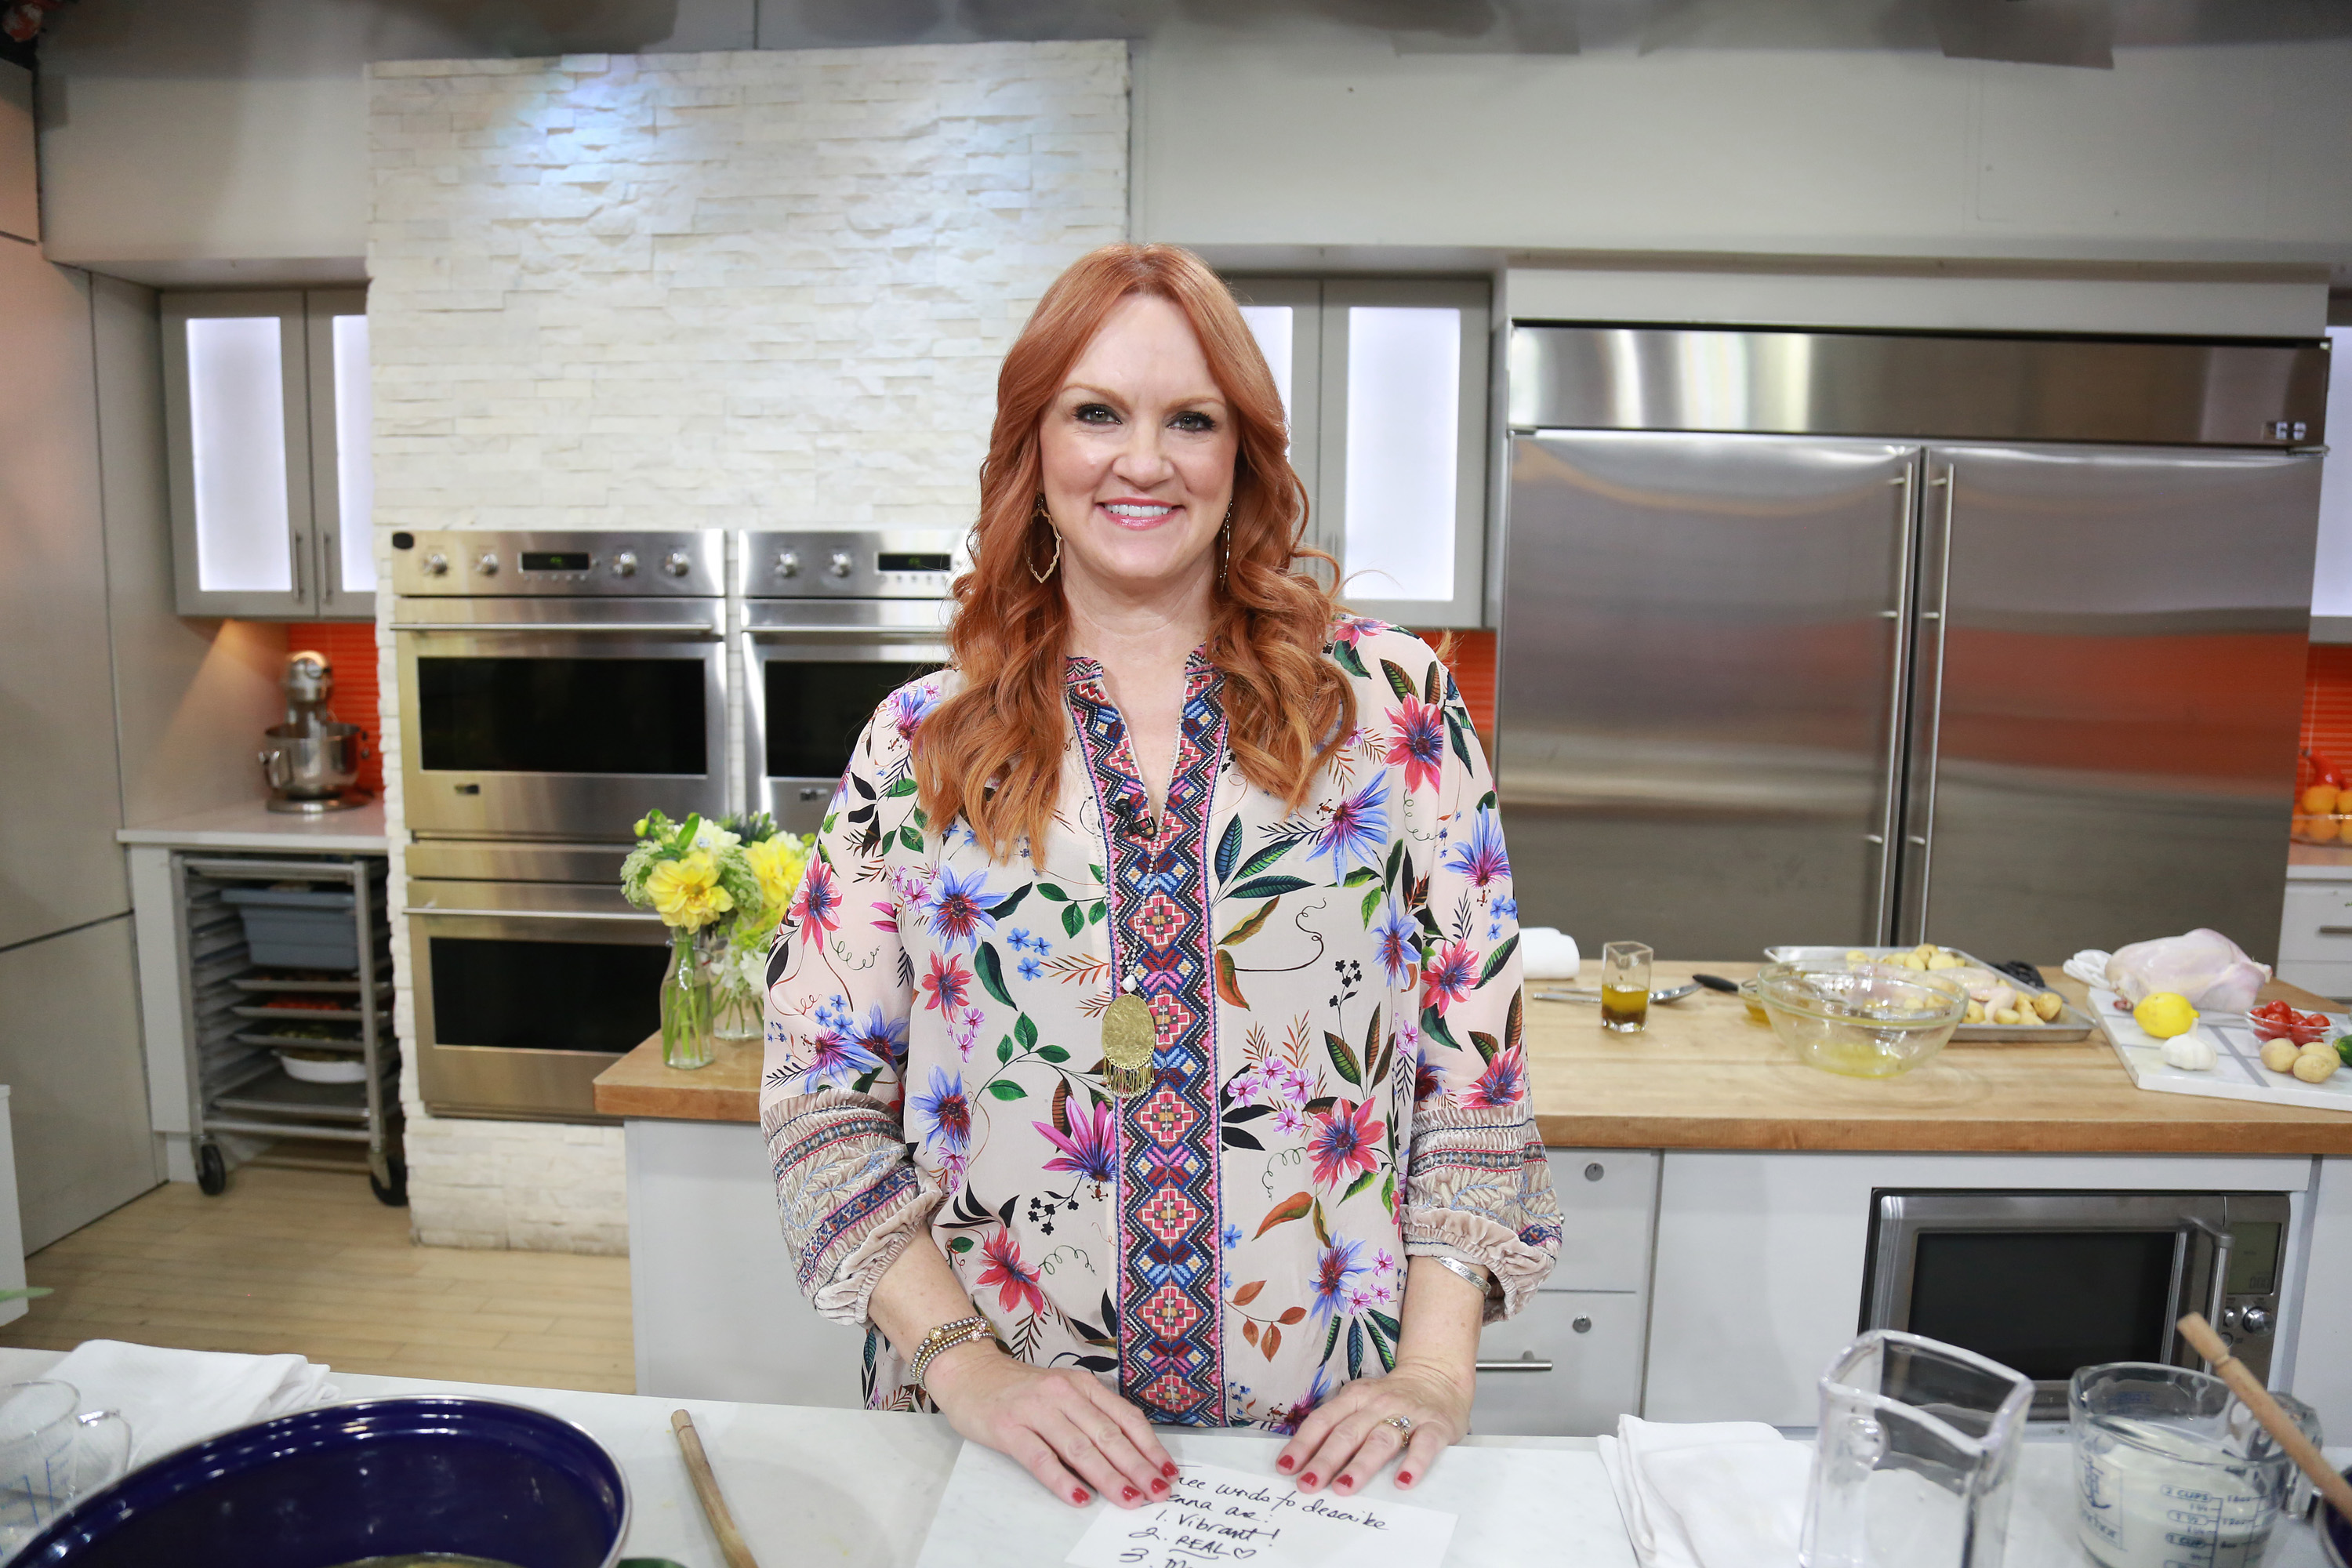 Ree Drummond during an appearance on the 'Today' show in 2019